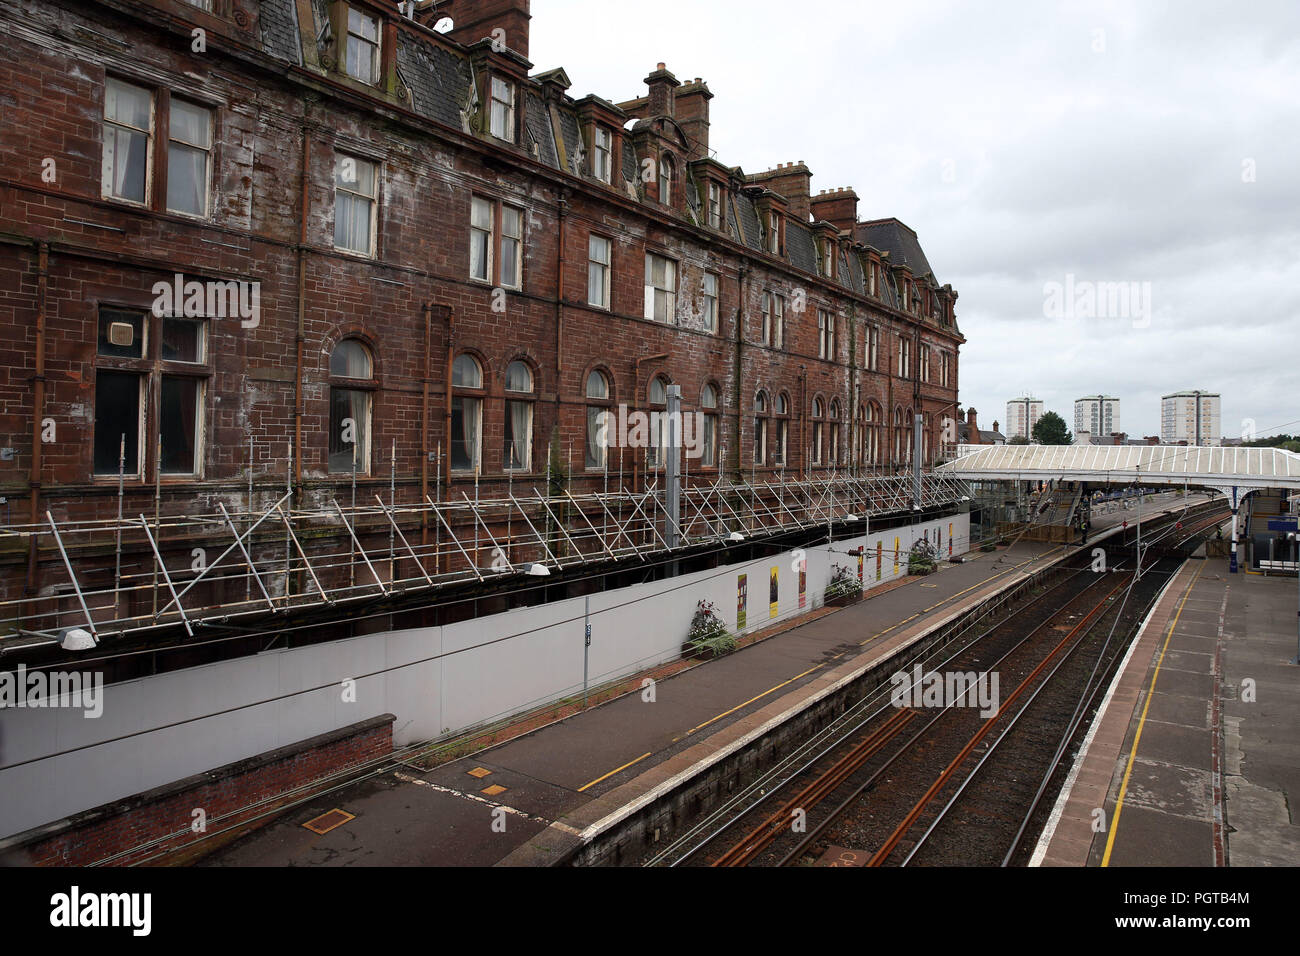 The former Station Hotel(left) in Ayr sitting next to the nearby railway line, the building has has been deemed unsafe after contractors found crumbling and exposed roof areas, resulting in an exclusion zone which has meant that no trains are running between Ayr and Girvan from Tuesday, while services between Glasgow Central and Stranraer are starting and terminating at Kilmarnock. Stock Photo